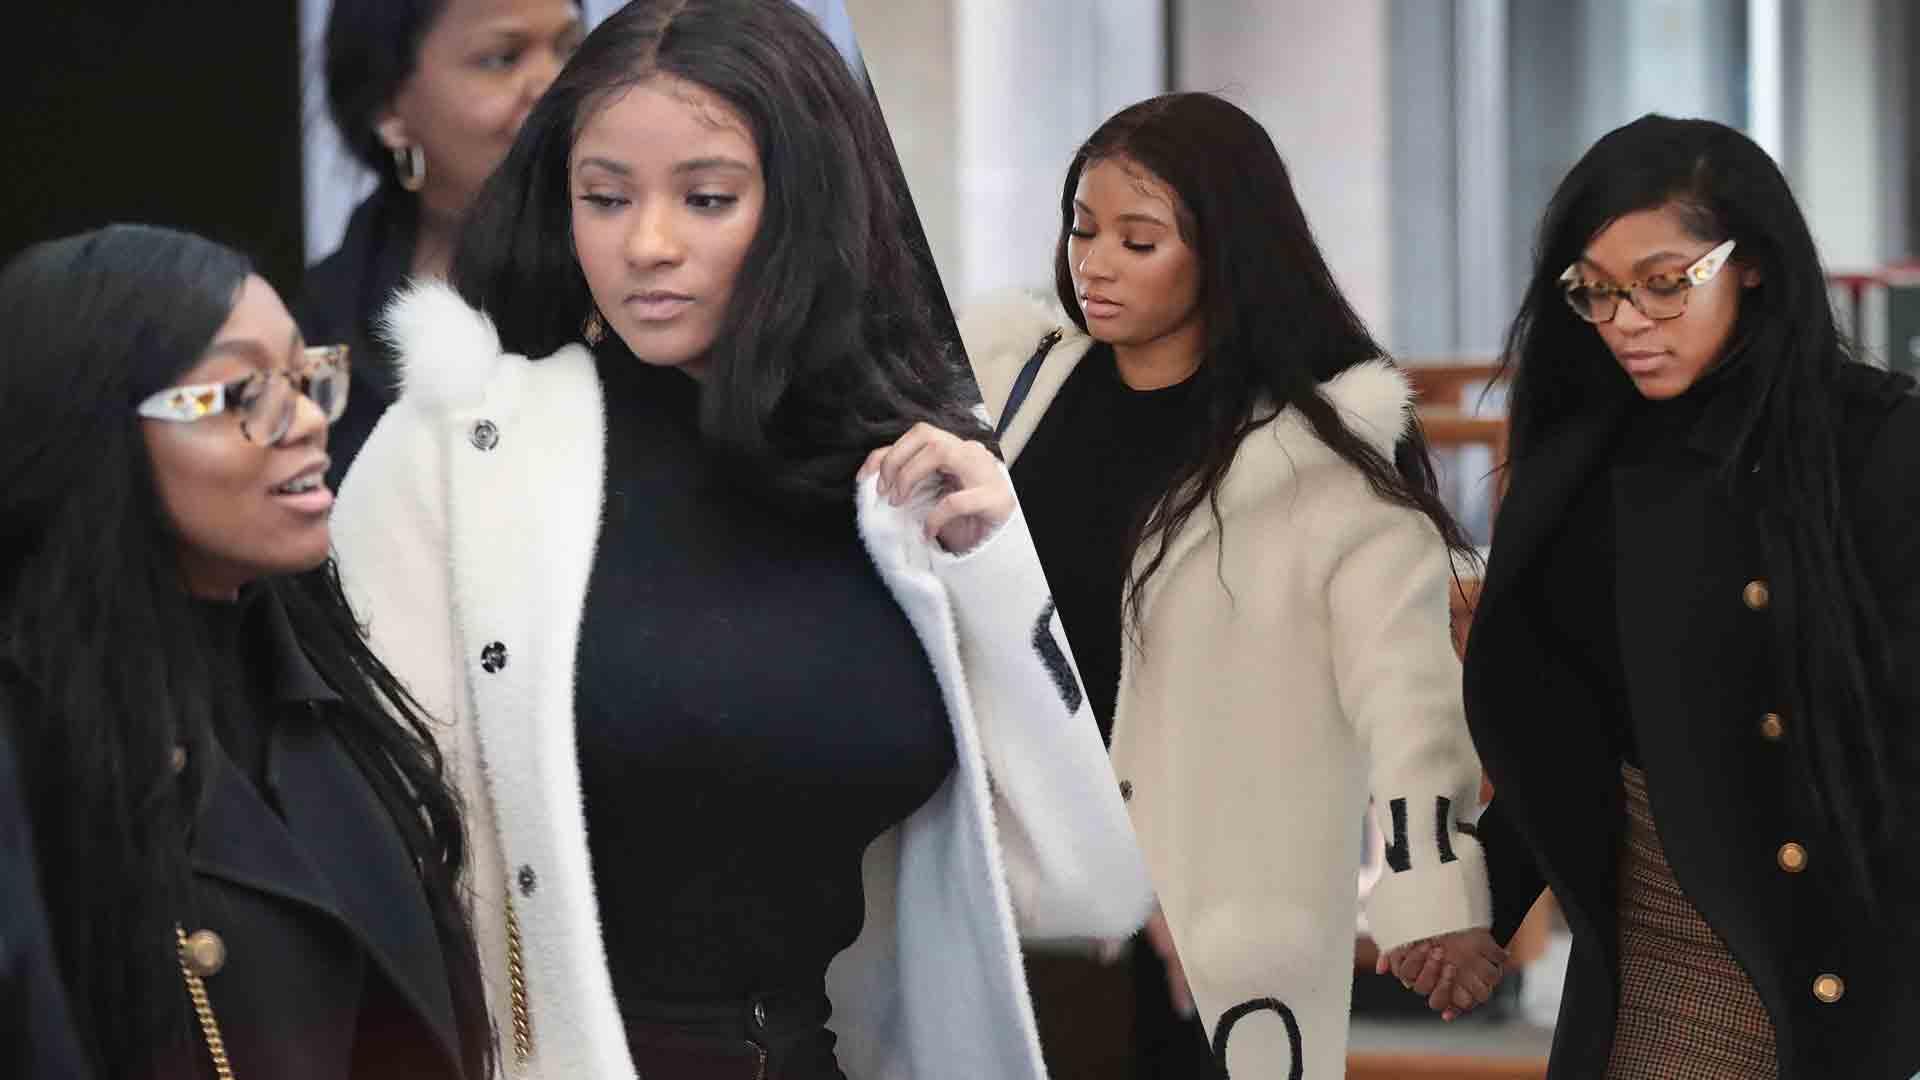 Family of R. Kelly Girlfriend Worried About Safety During Criminal Case